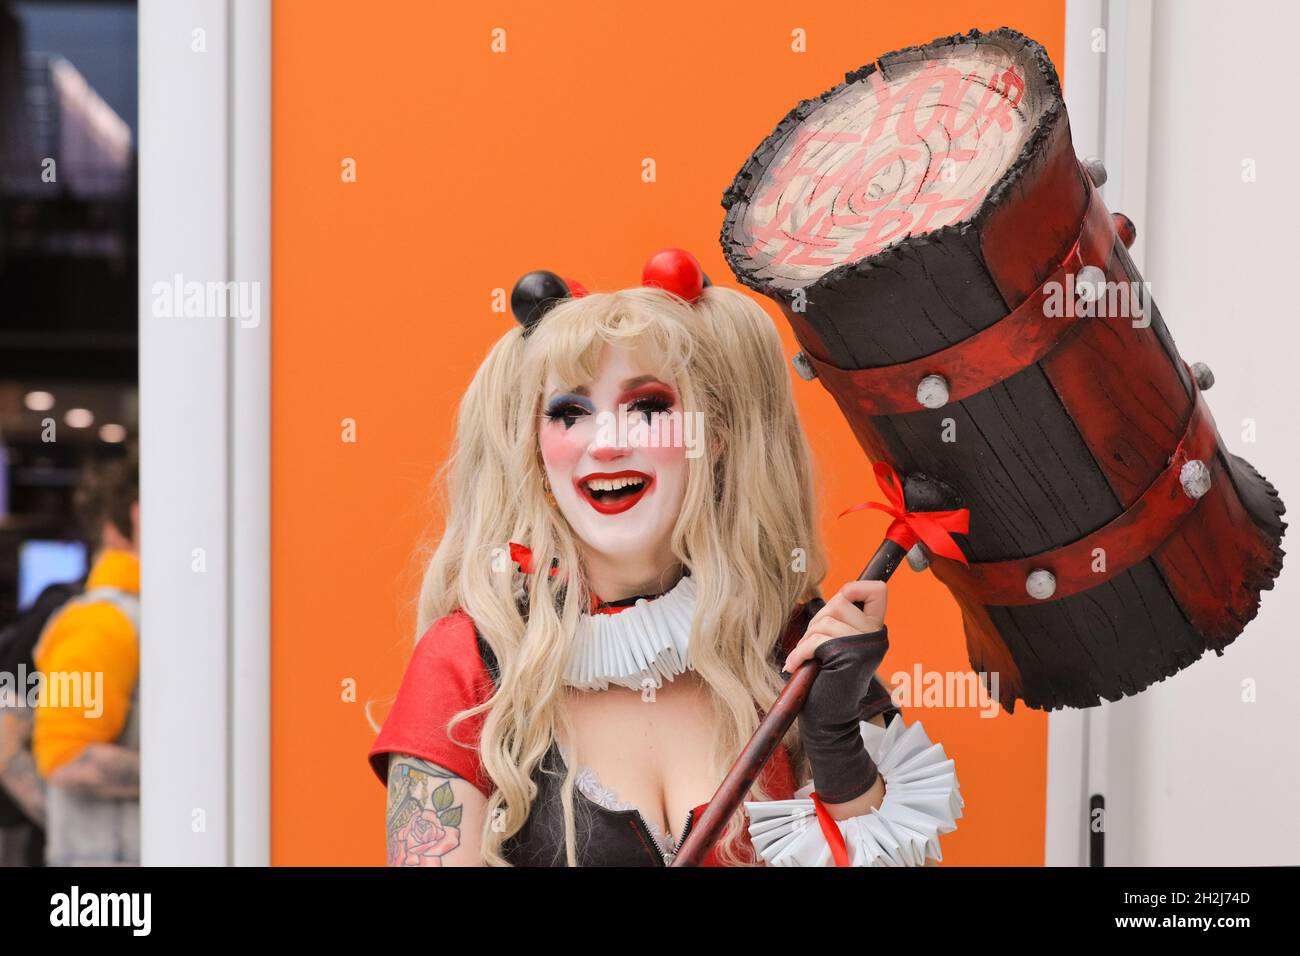 ExCel, London, UK. 22nd Oct, 2021. A cosplayer has fun posing as Harley Quinn, a character by DC Comics. Cosplayers, fans and visitors once again descend on the ExCel London exhibition centre for MCM Comic Con. MCM London Comic Con returns 22-24 October for a celebration of Pop Culture. Credit: Imageplotter/Alamy Live News Stock Photo